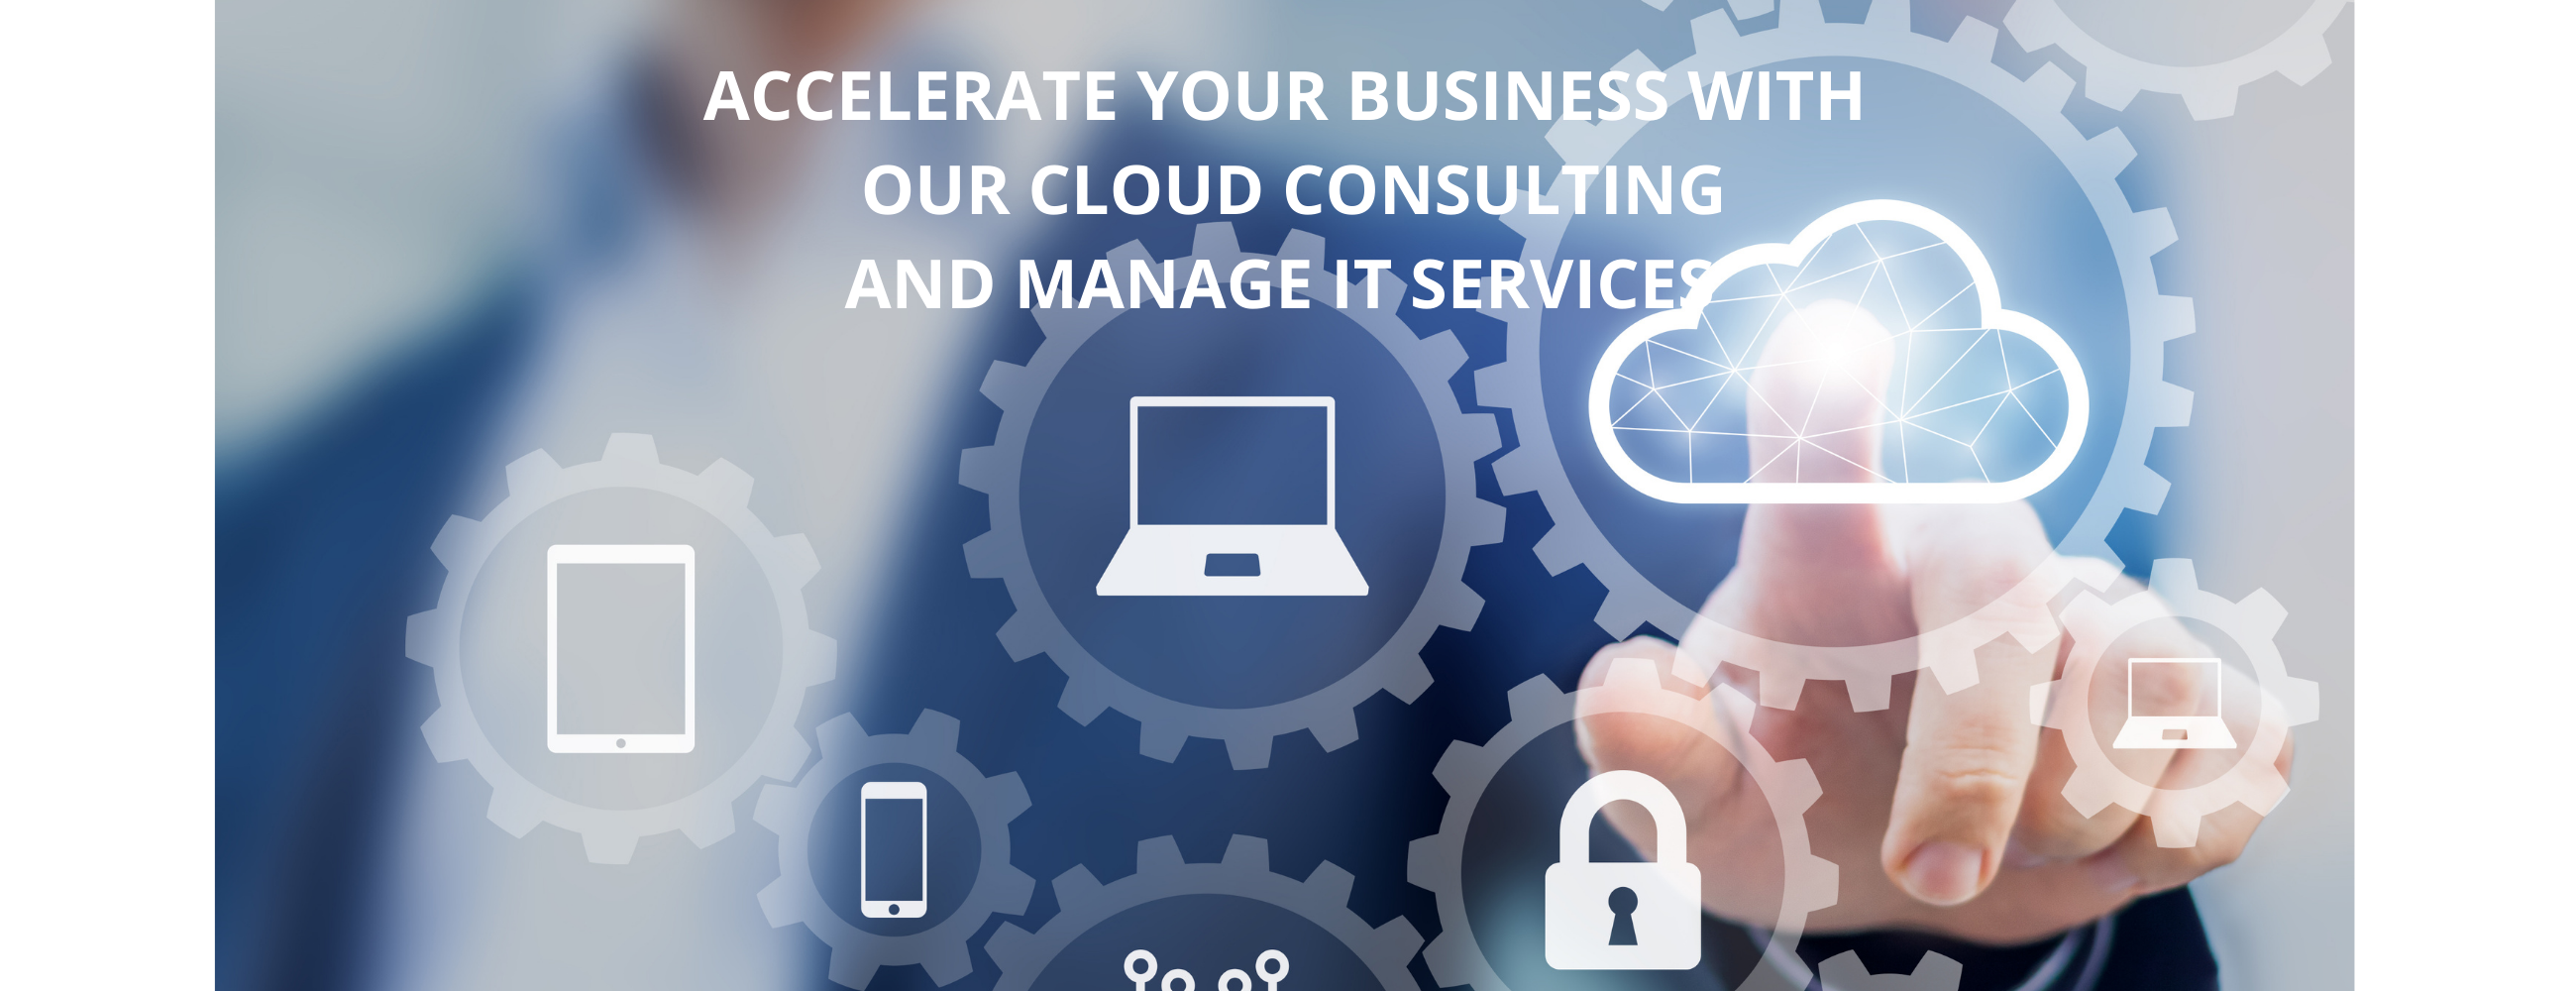 ACCELERATE YOUR BUSINESS WITH OUR CLOUD CONSULTING AND MANAGE IT SERVICES (2188 × 900 px) (2600 × 1200 px) (2600 × 1000 px)